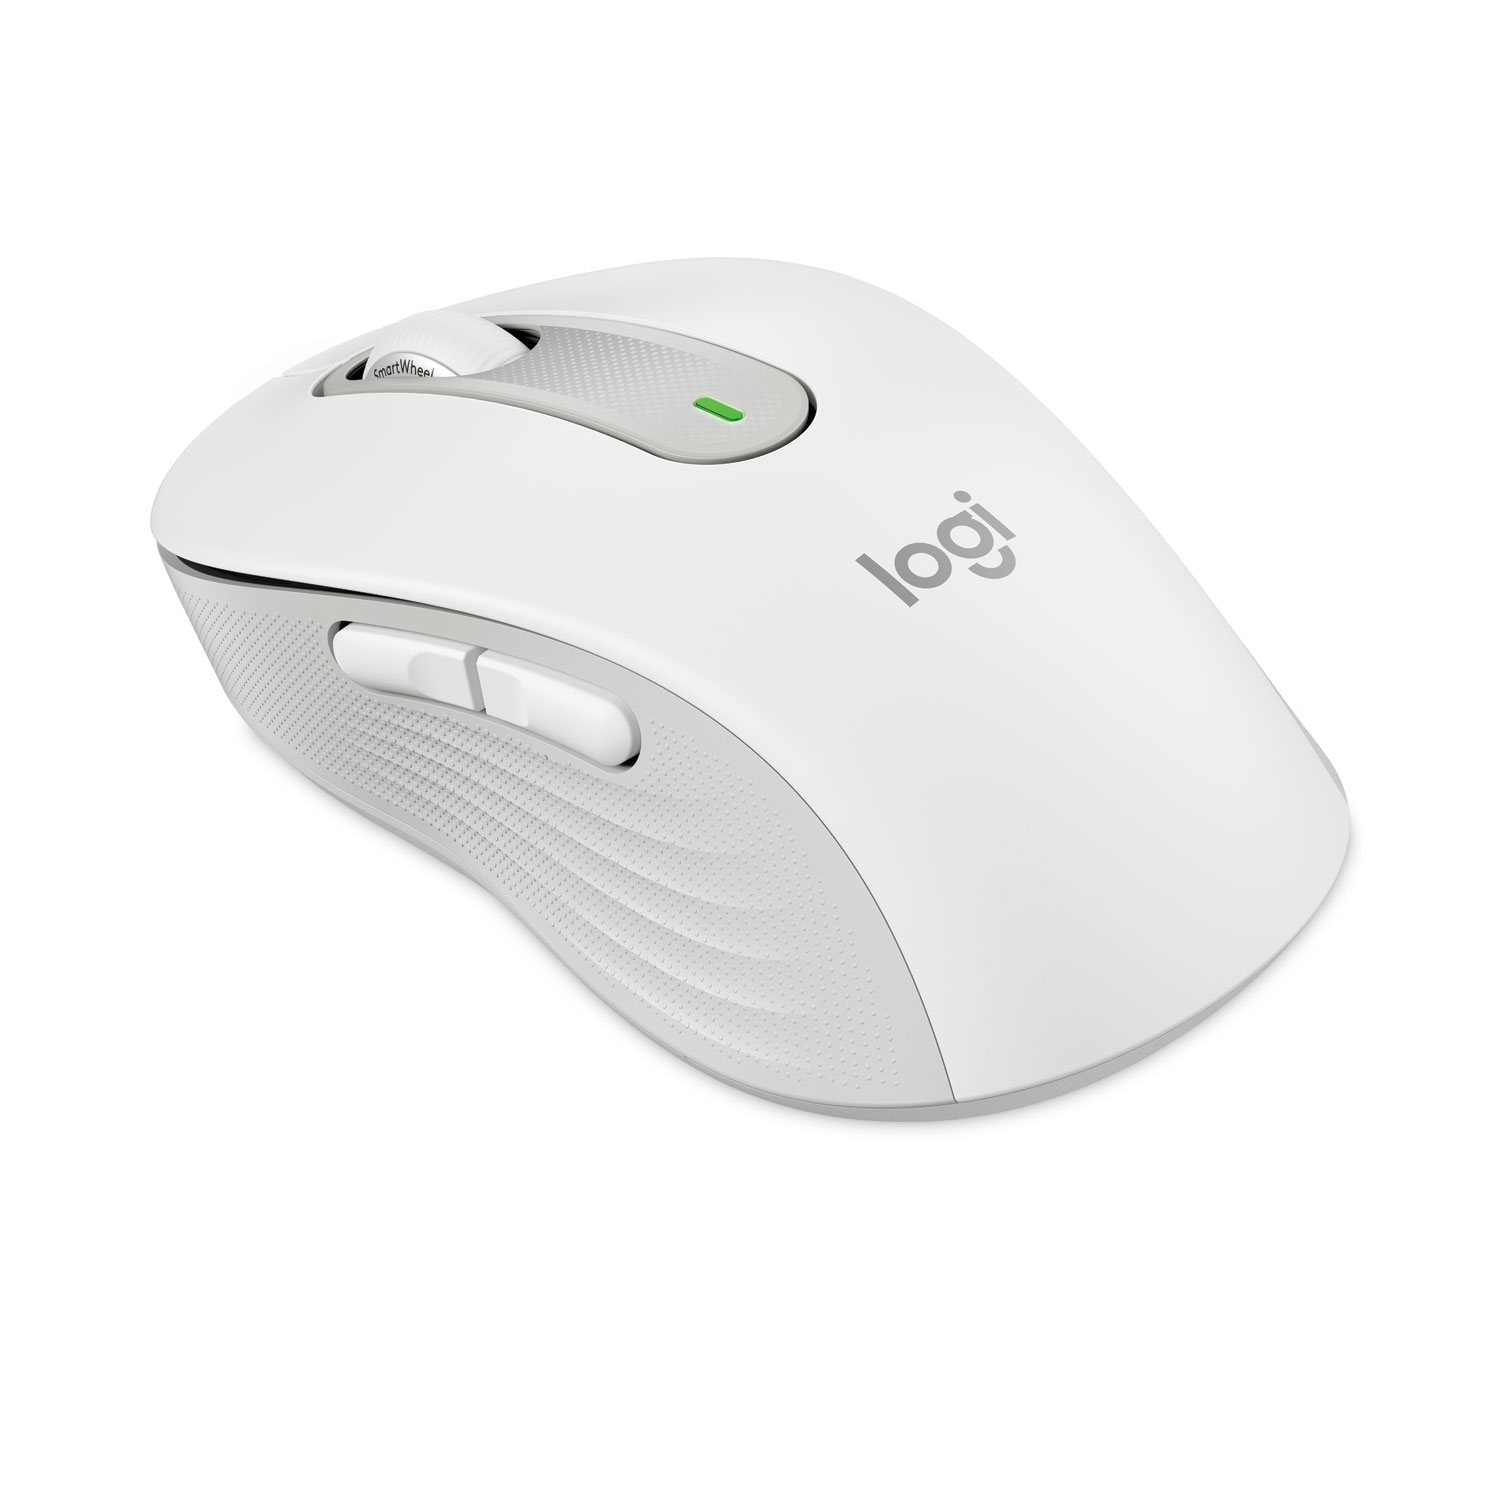 Signature M650 for Business Wireless Mouse, Large, 2.4 GHz